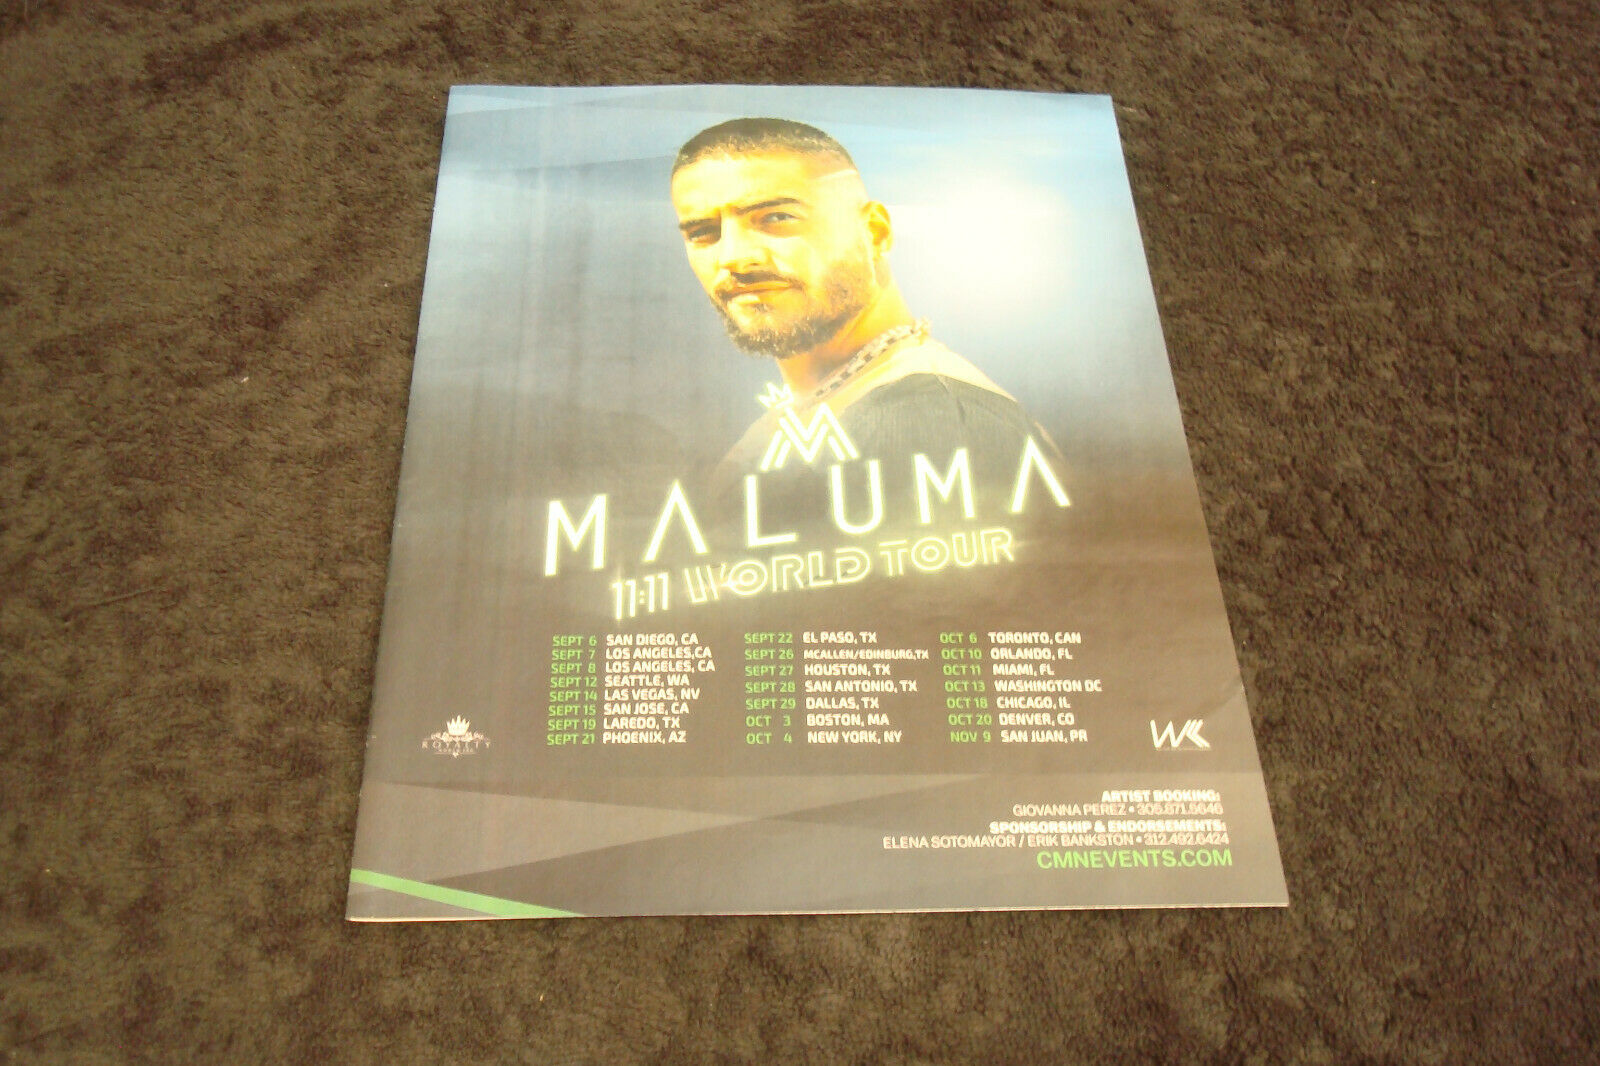 Maluma 2019 Ad For 11:11 World Tour With Dates, Cities & Becky G World Tour